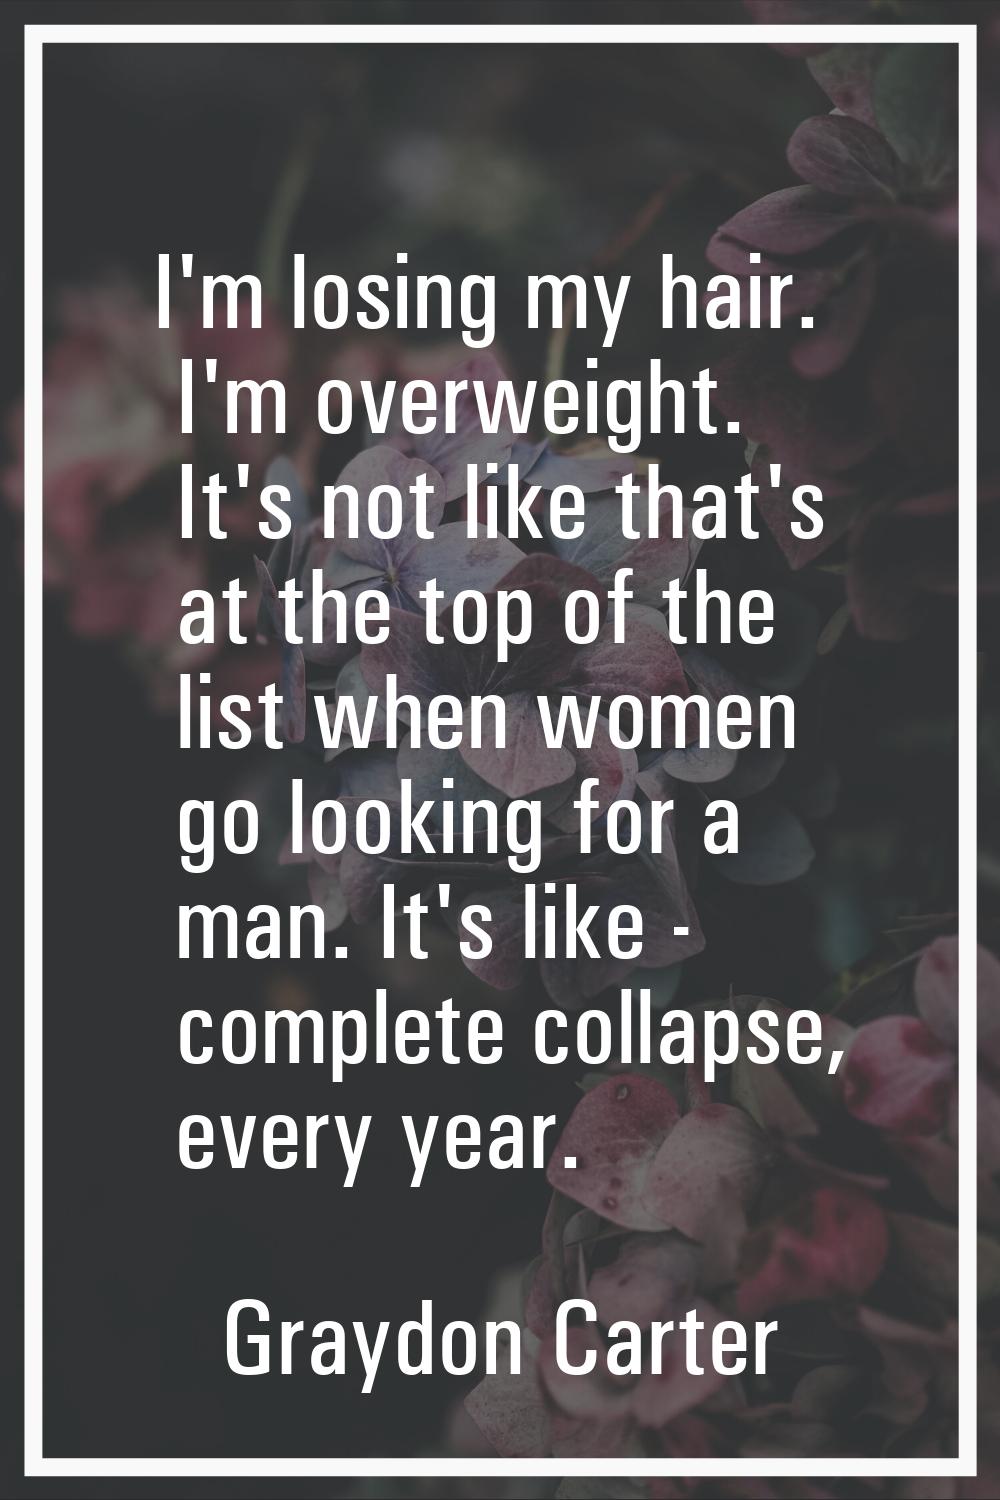 I'm losing my hair. I'm overweight. It's not like that's at the top of the list when women go looki